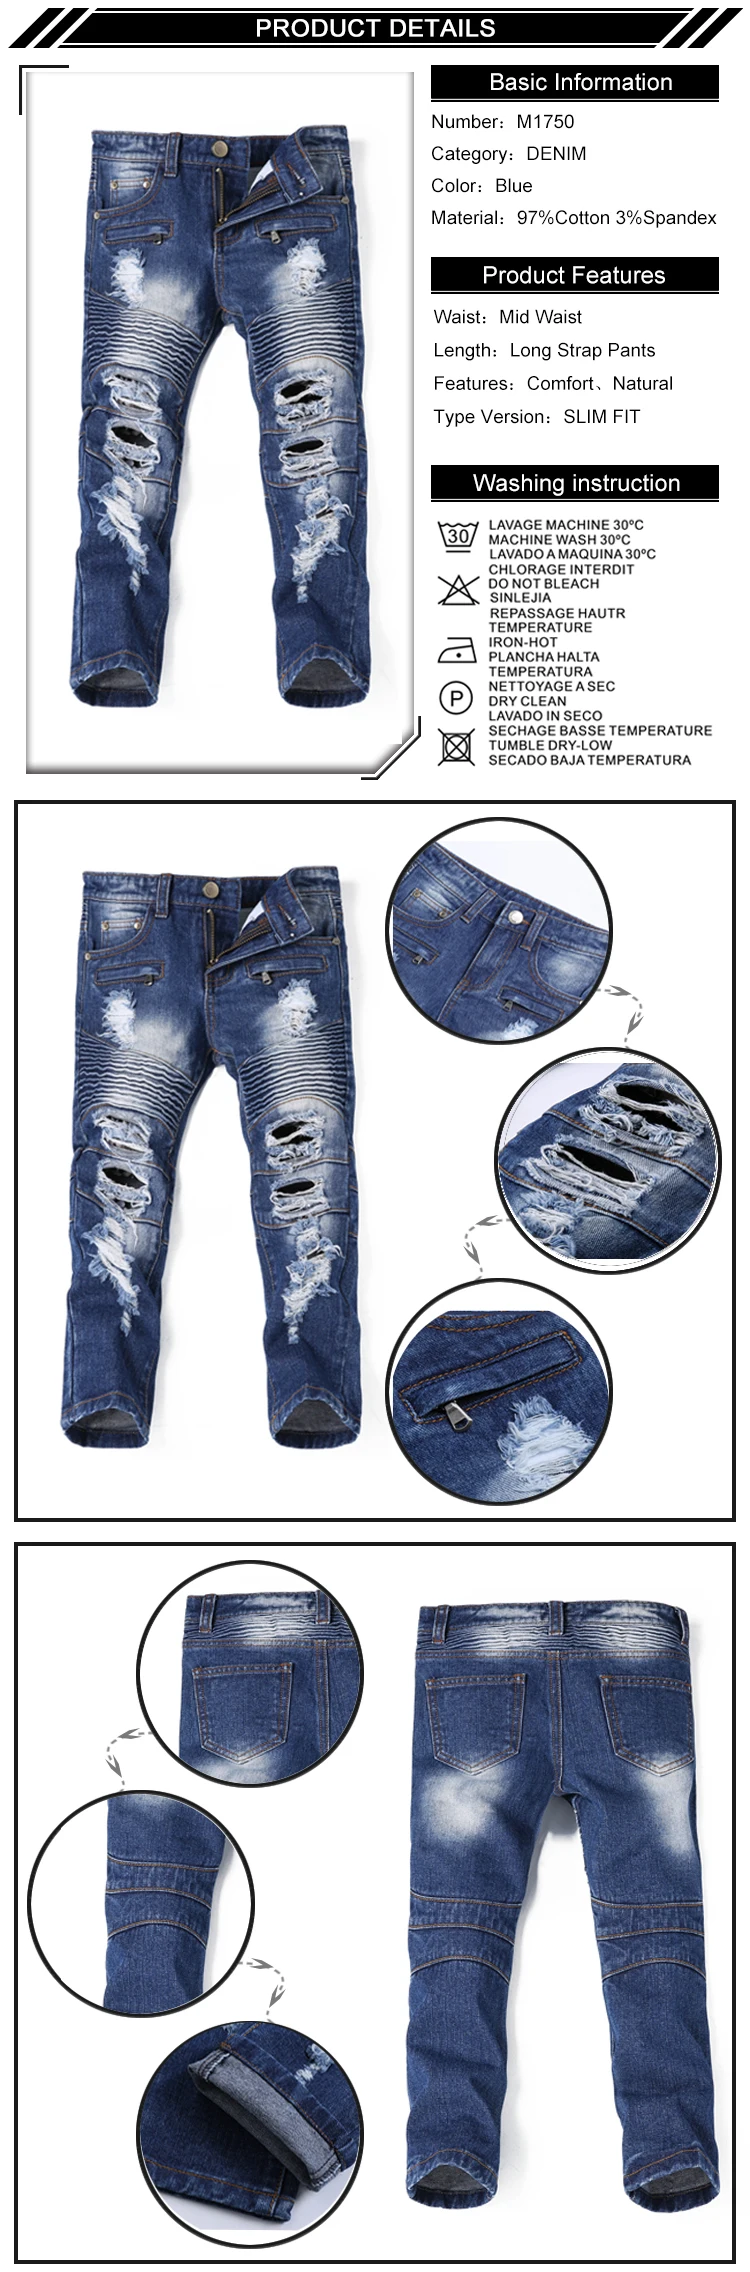 name it sale jeans